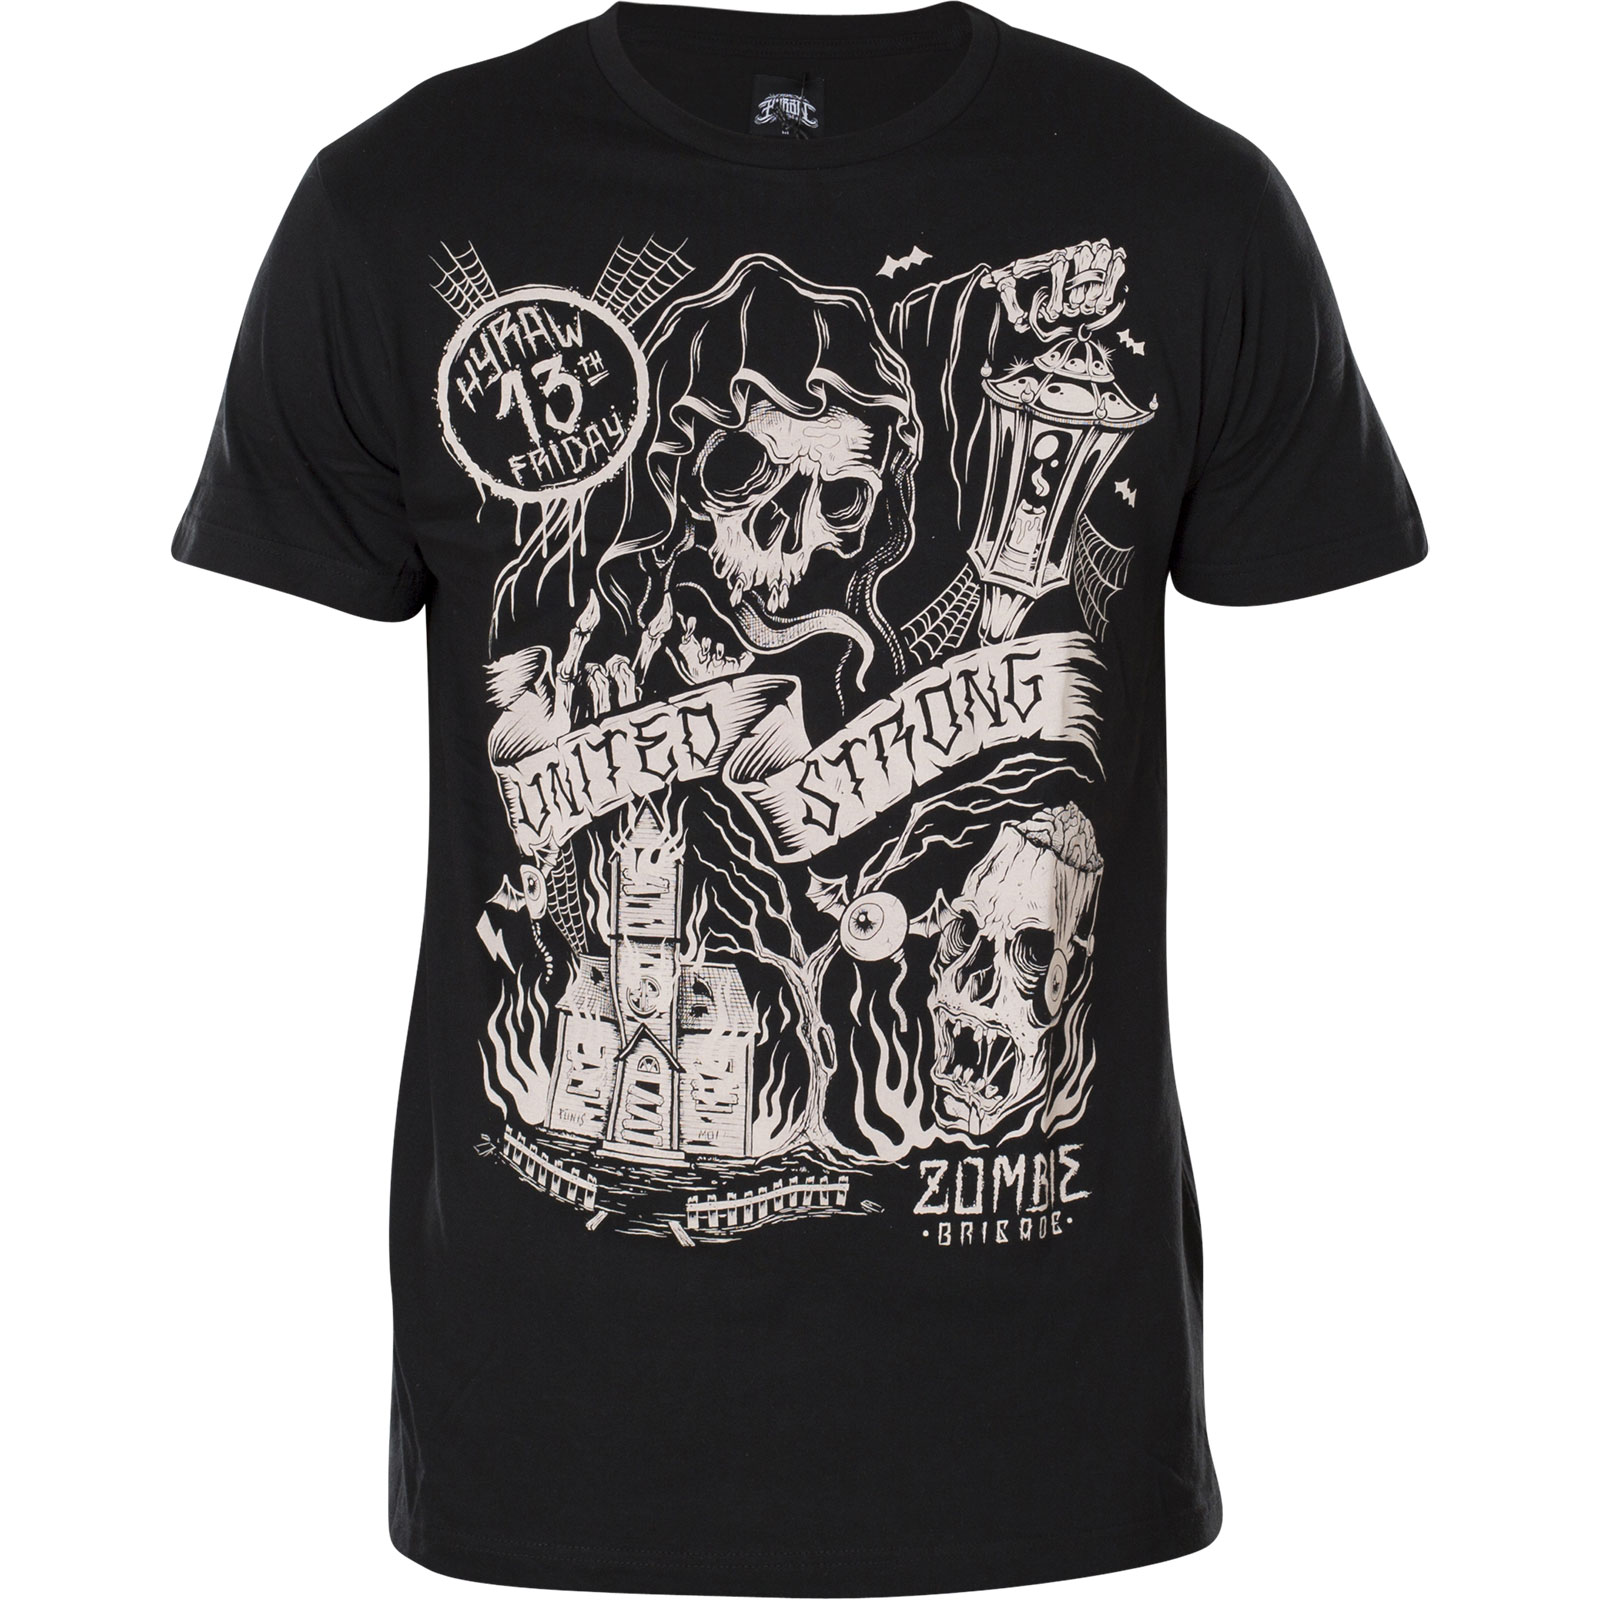 Hyraw T-Shirt Zombies in black with zombies